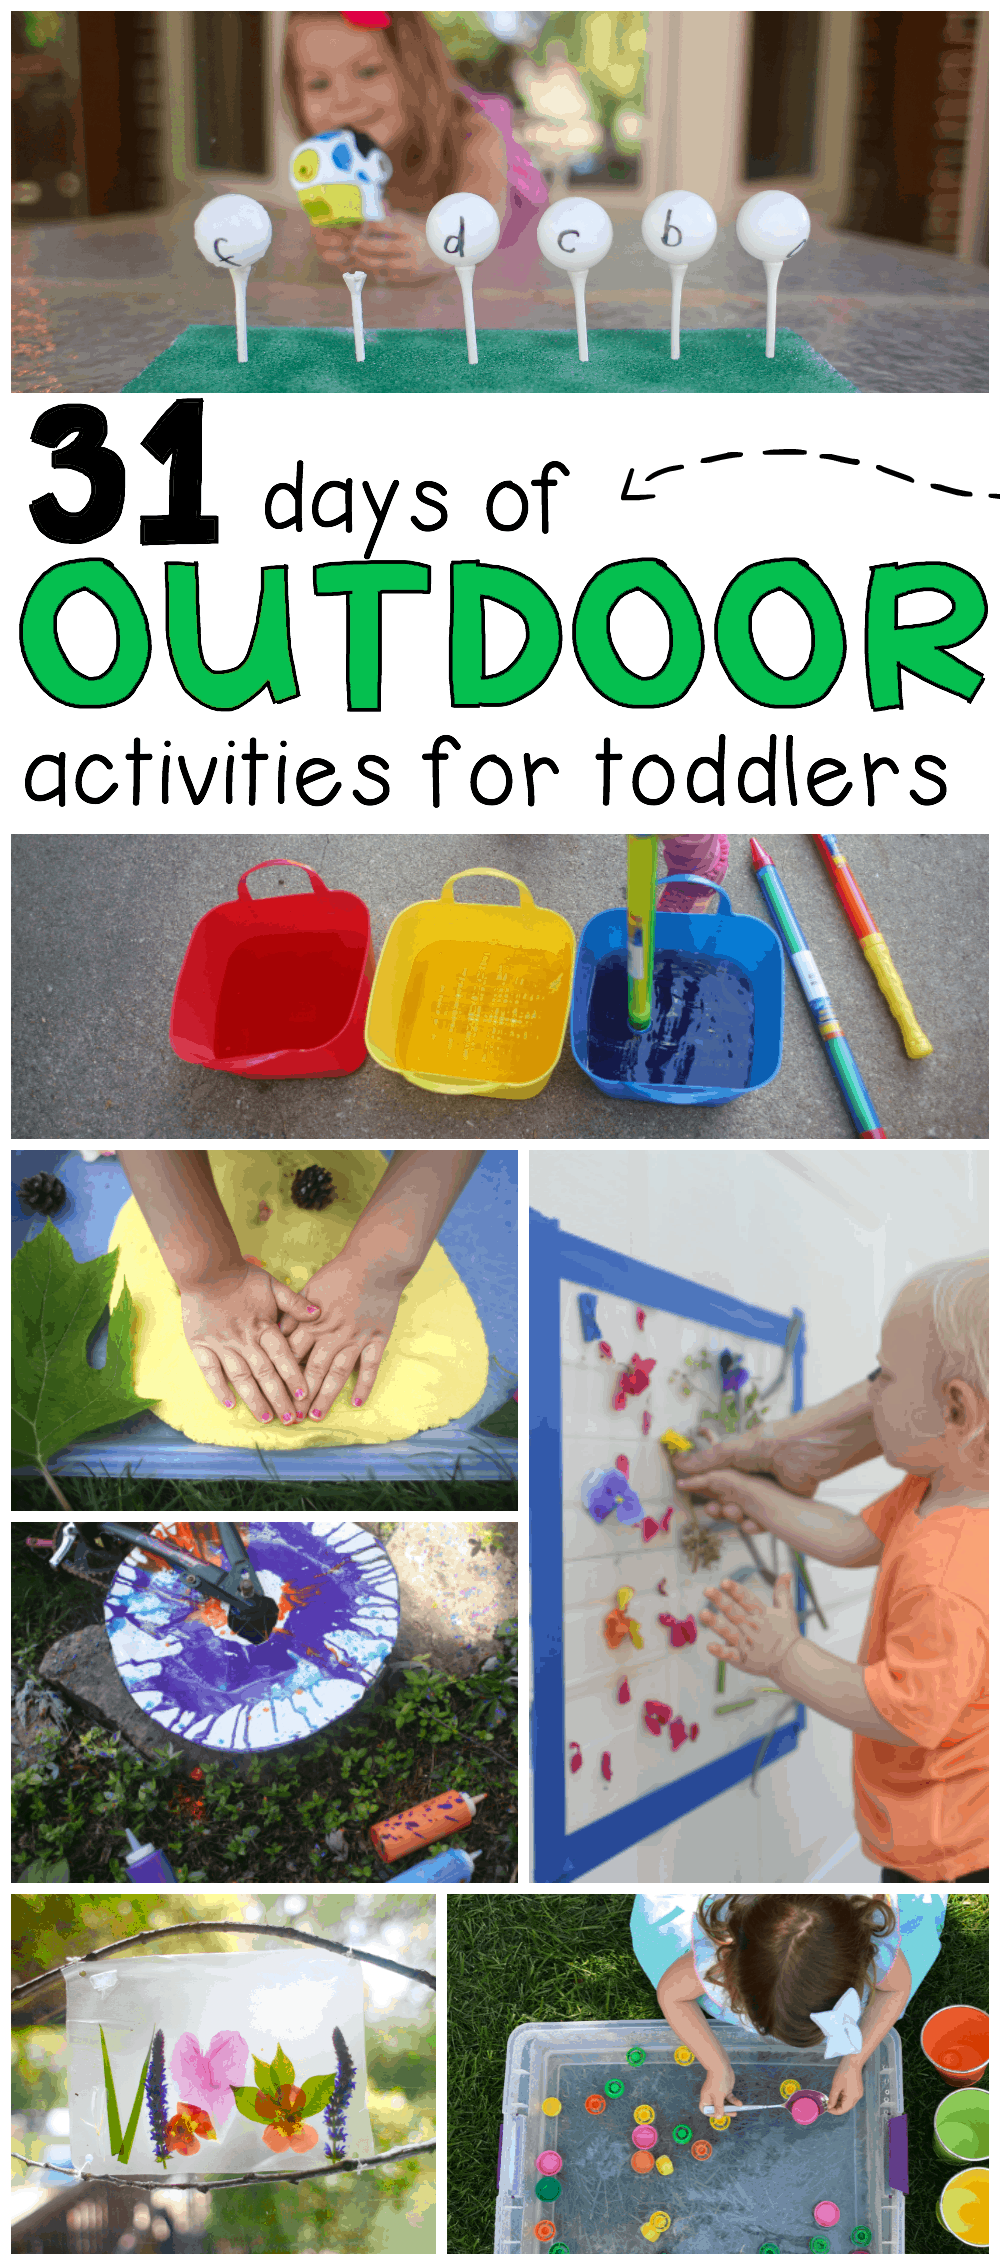 31 Days of Outdoor Activities for Toddlers - I Can Teach My Child!